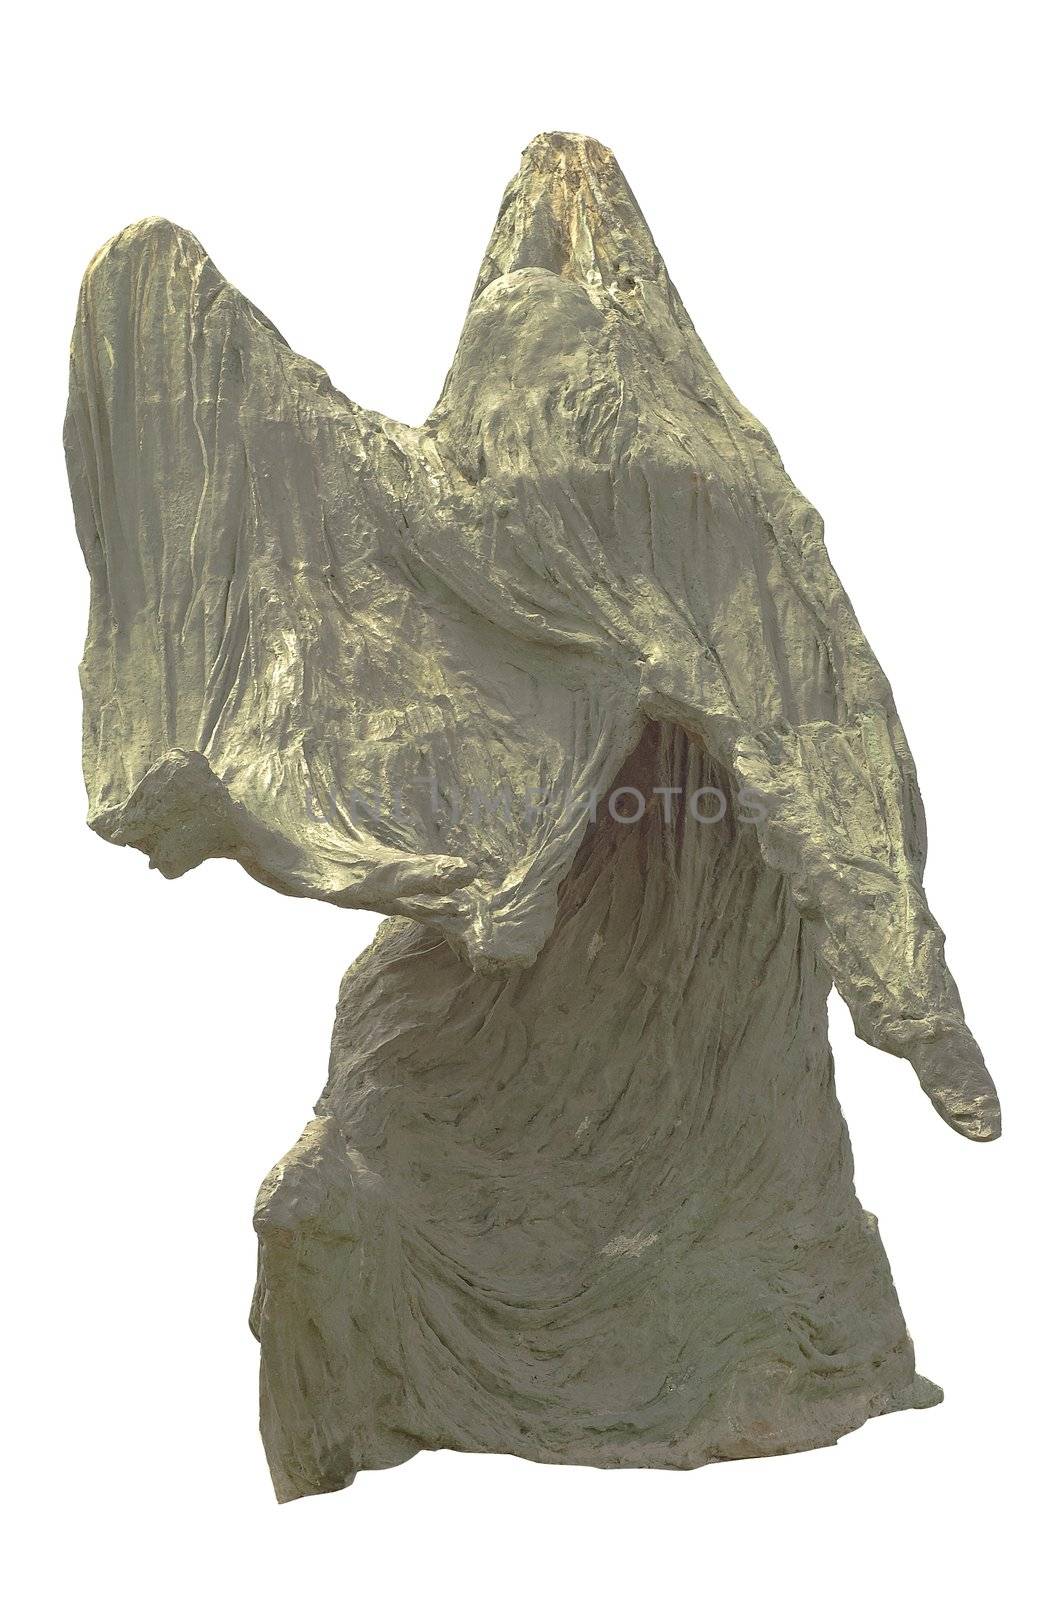 Sculpture an Angel isolated on White.
Clipping Path Included.